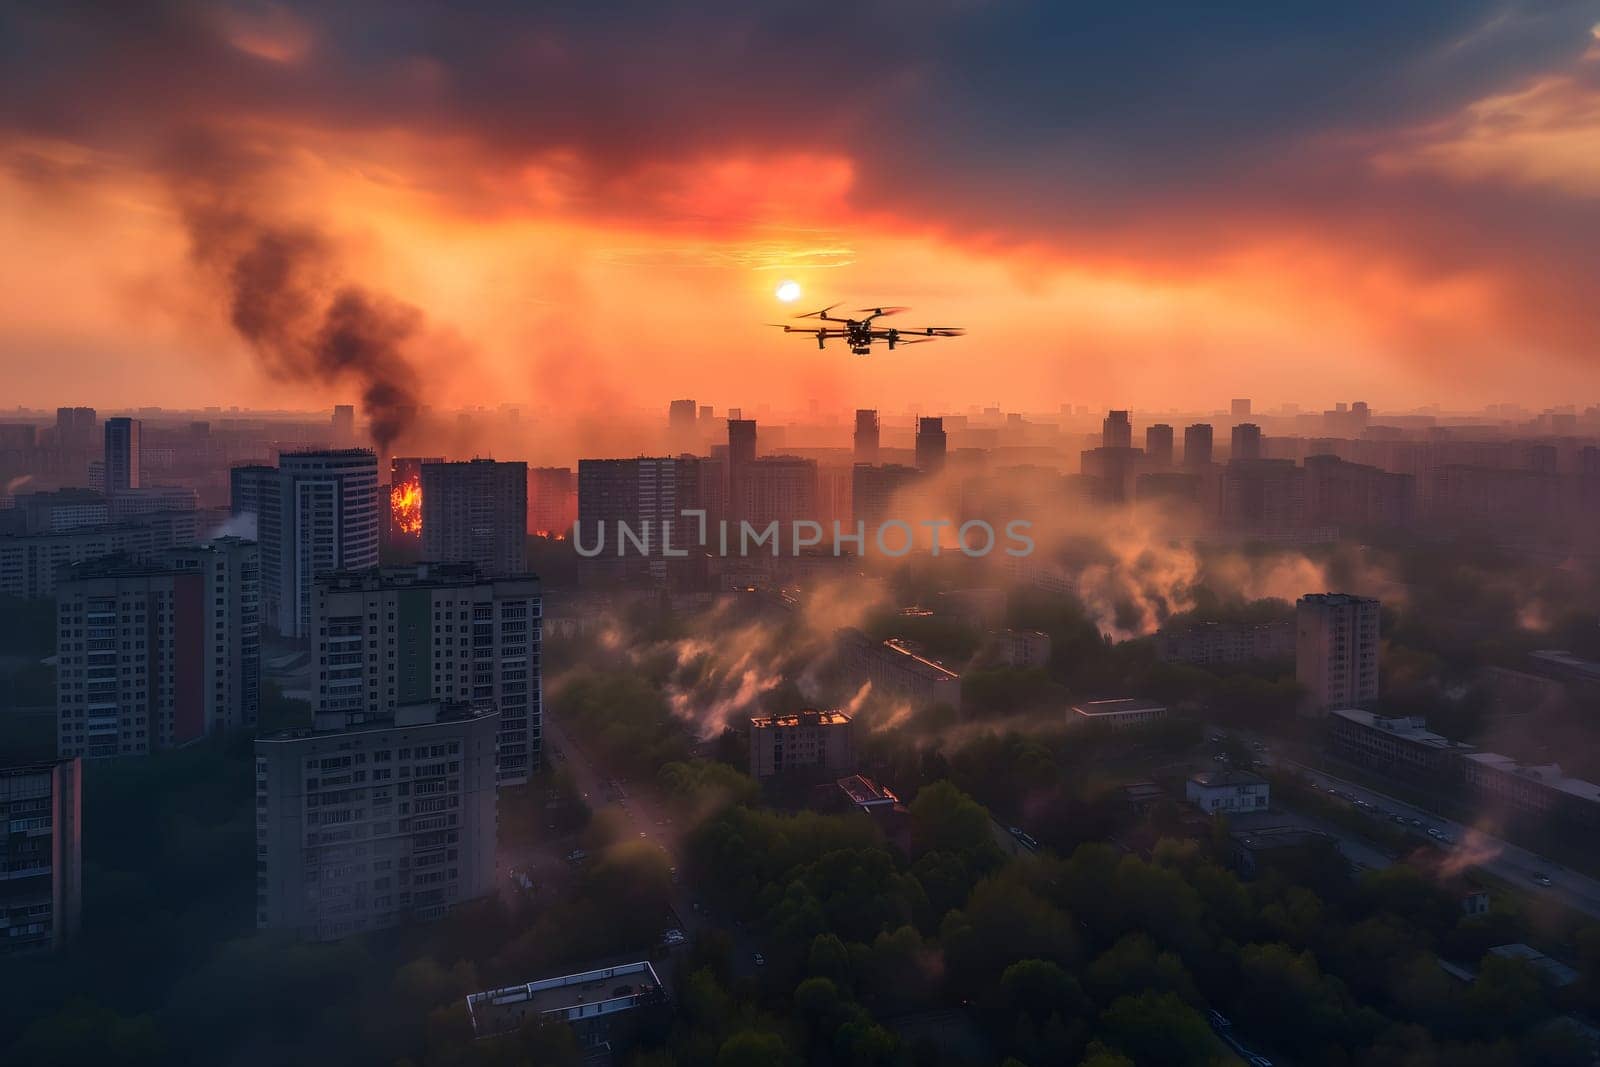 Copter drone over burning city at sunset or sunrise by z1b